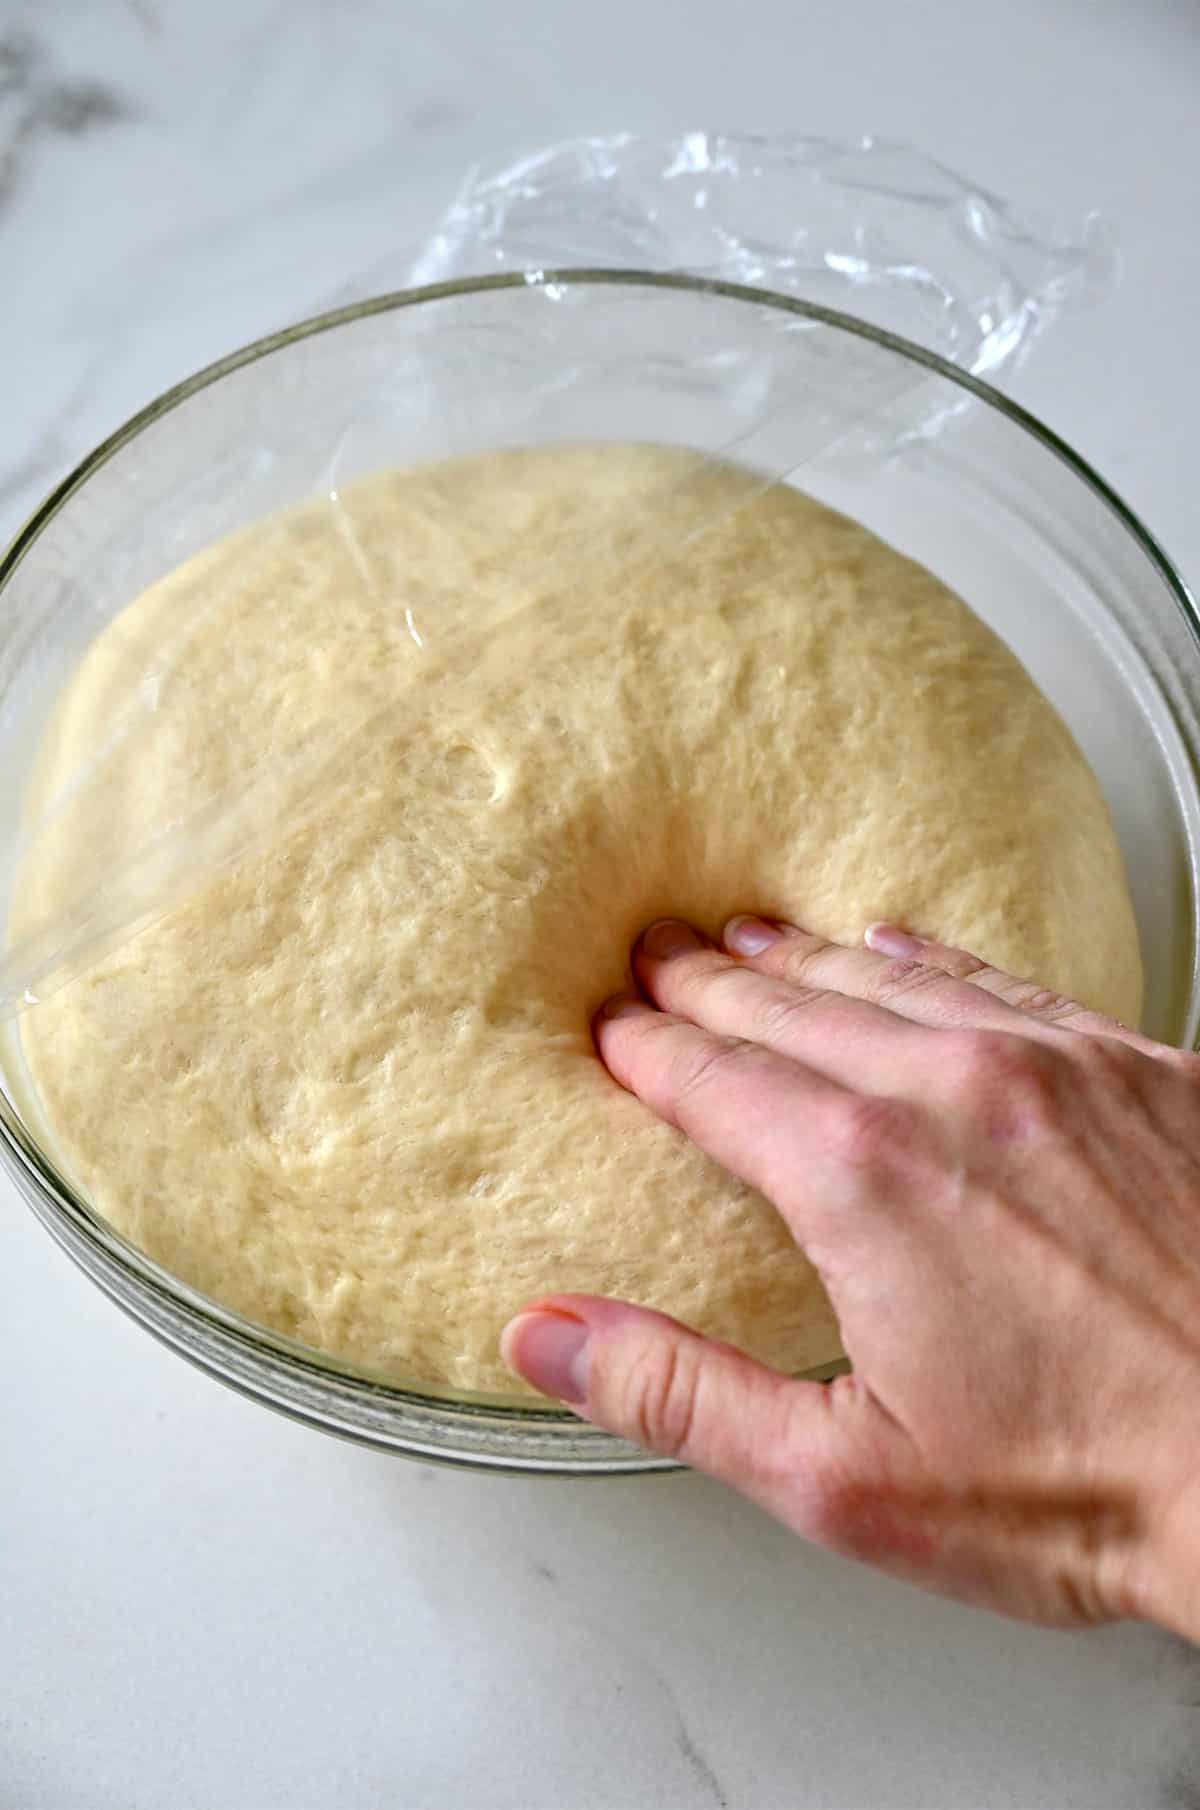 A hand presses into proofed dough in a glass bowl.